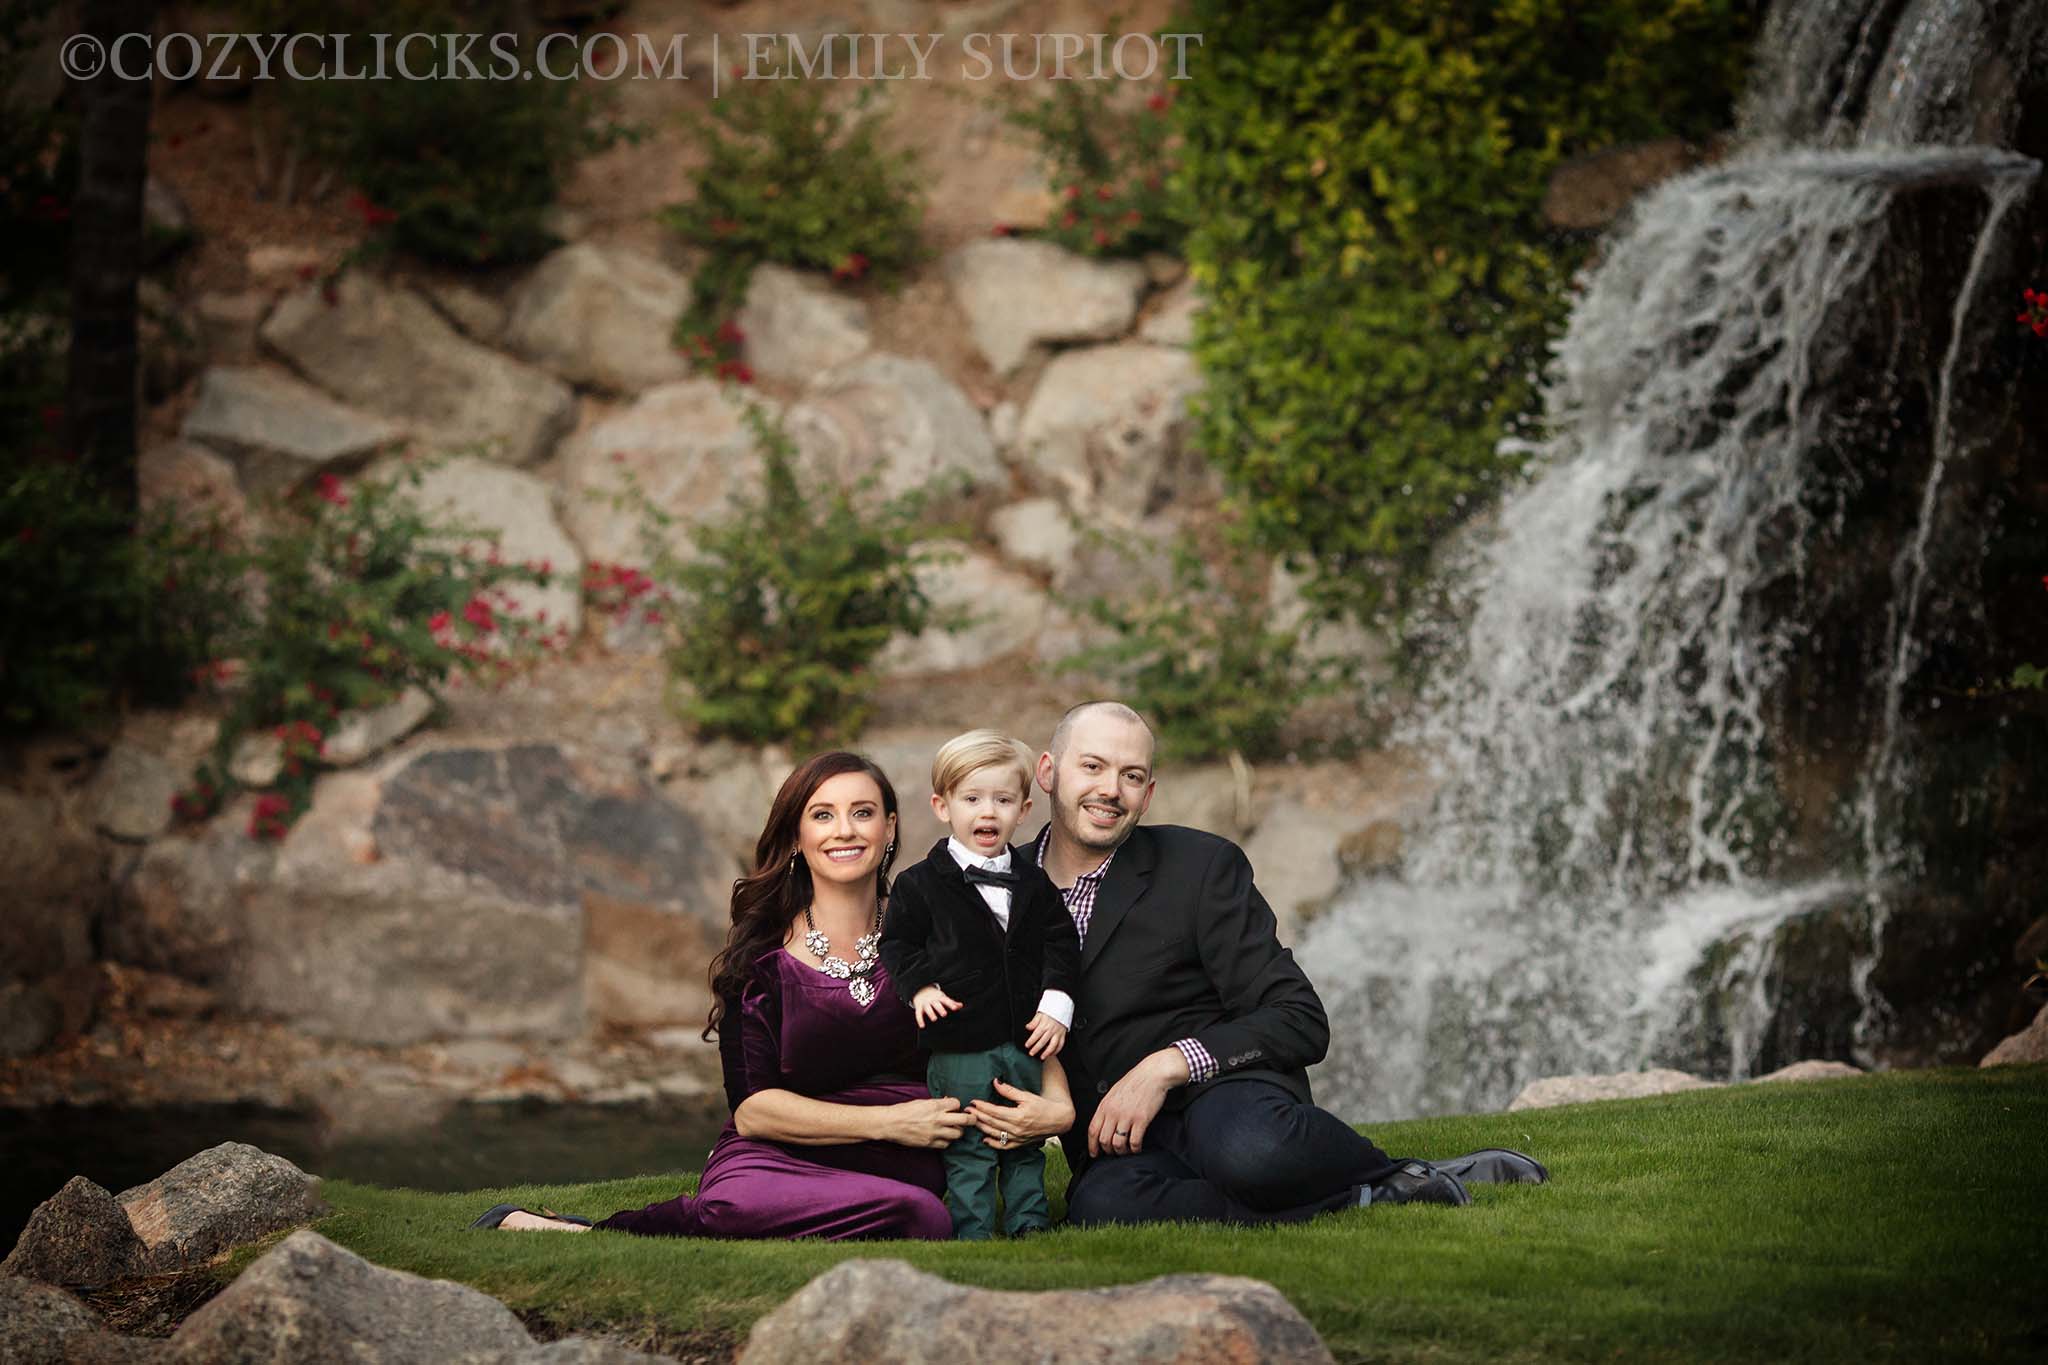 Maternity family photography at the Phoenician resort